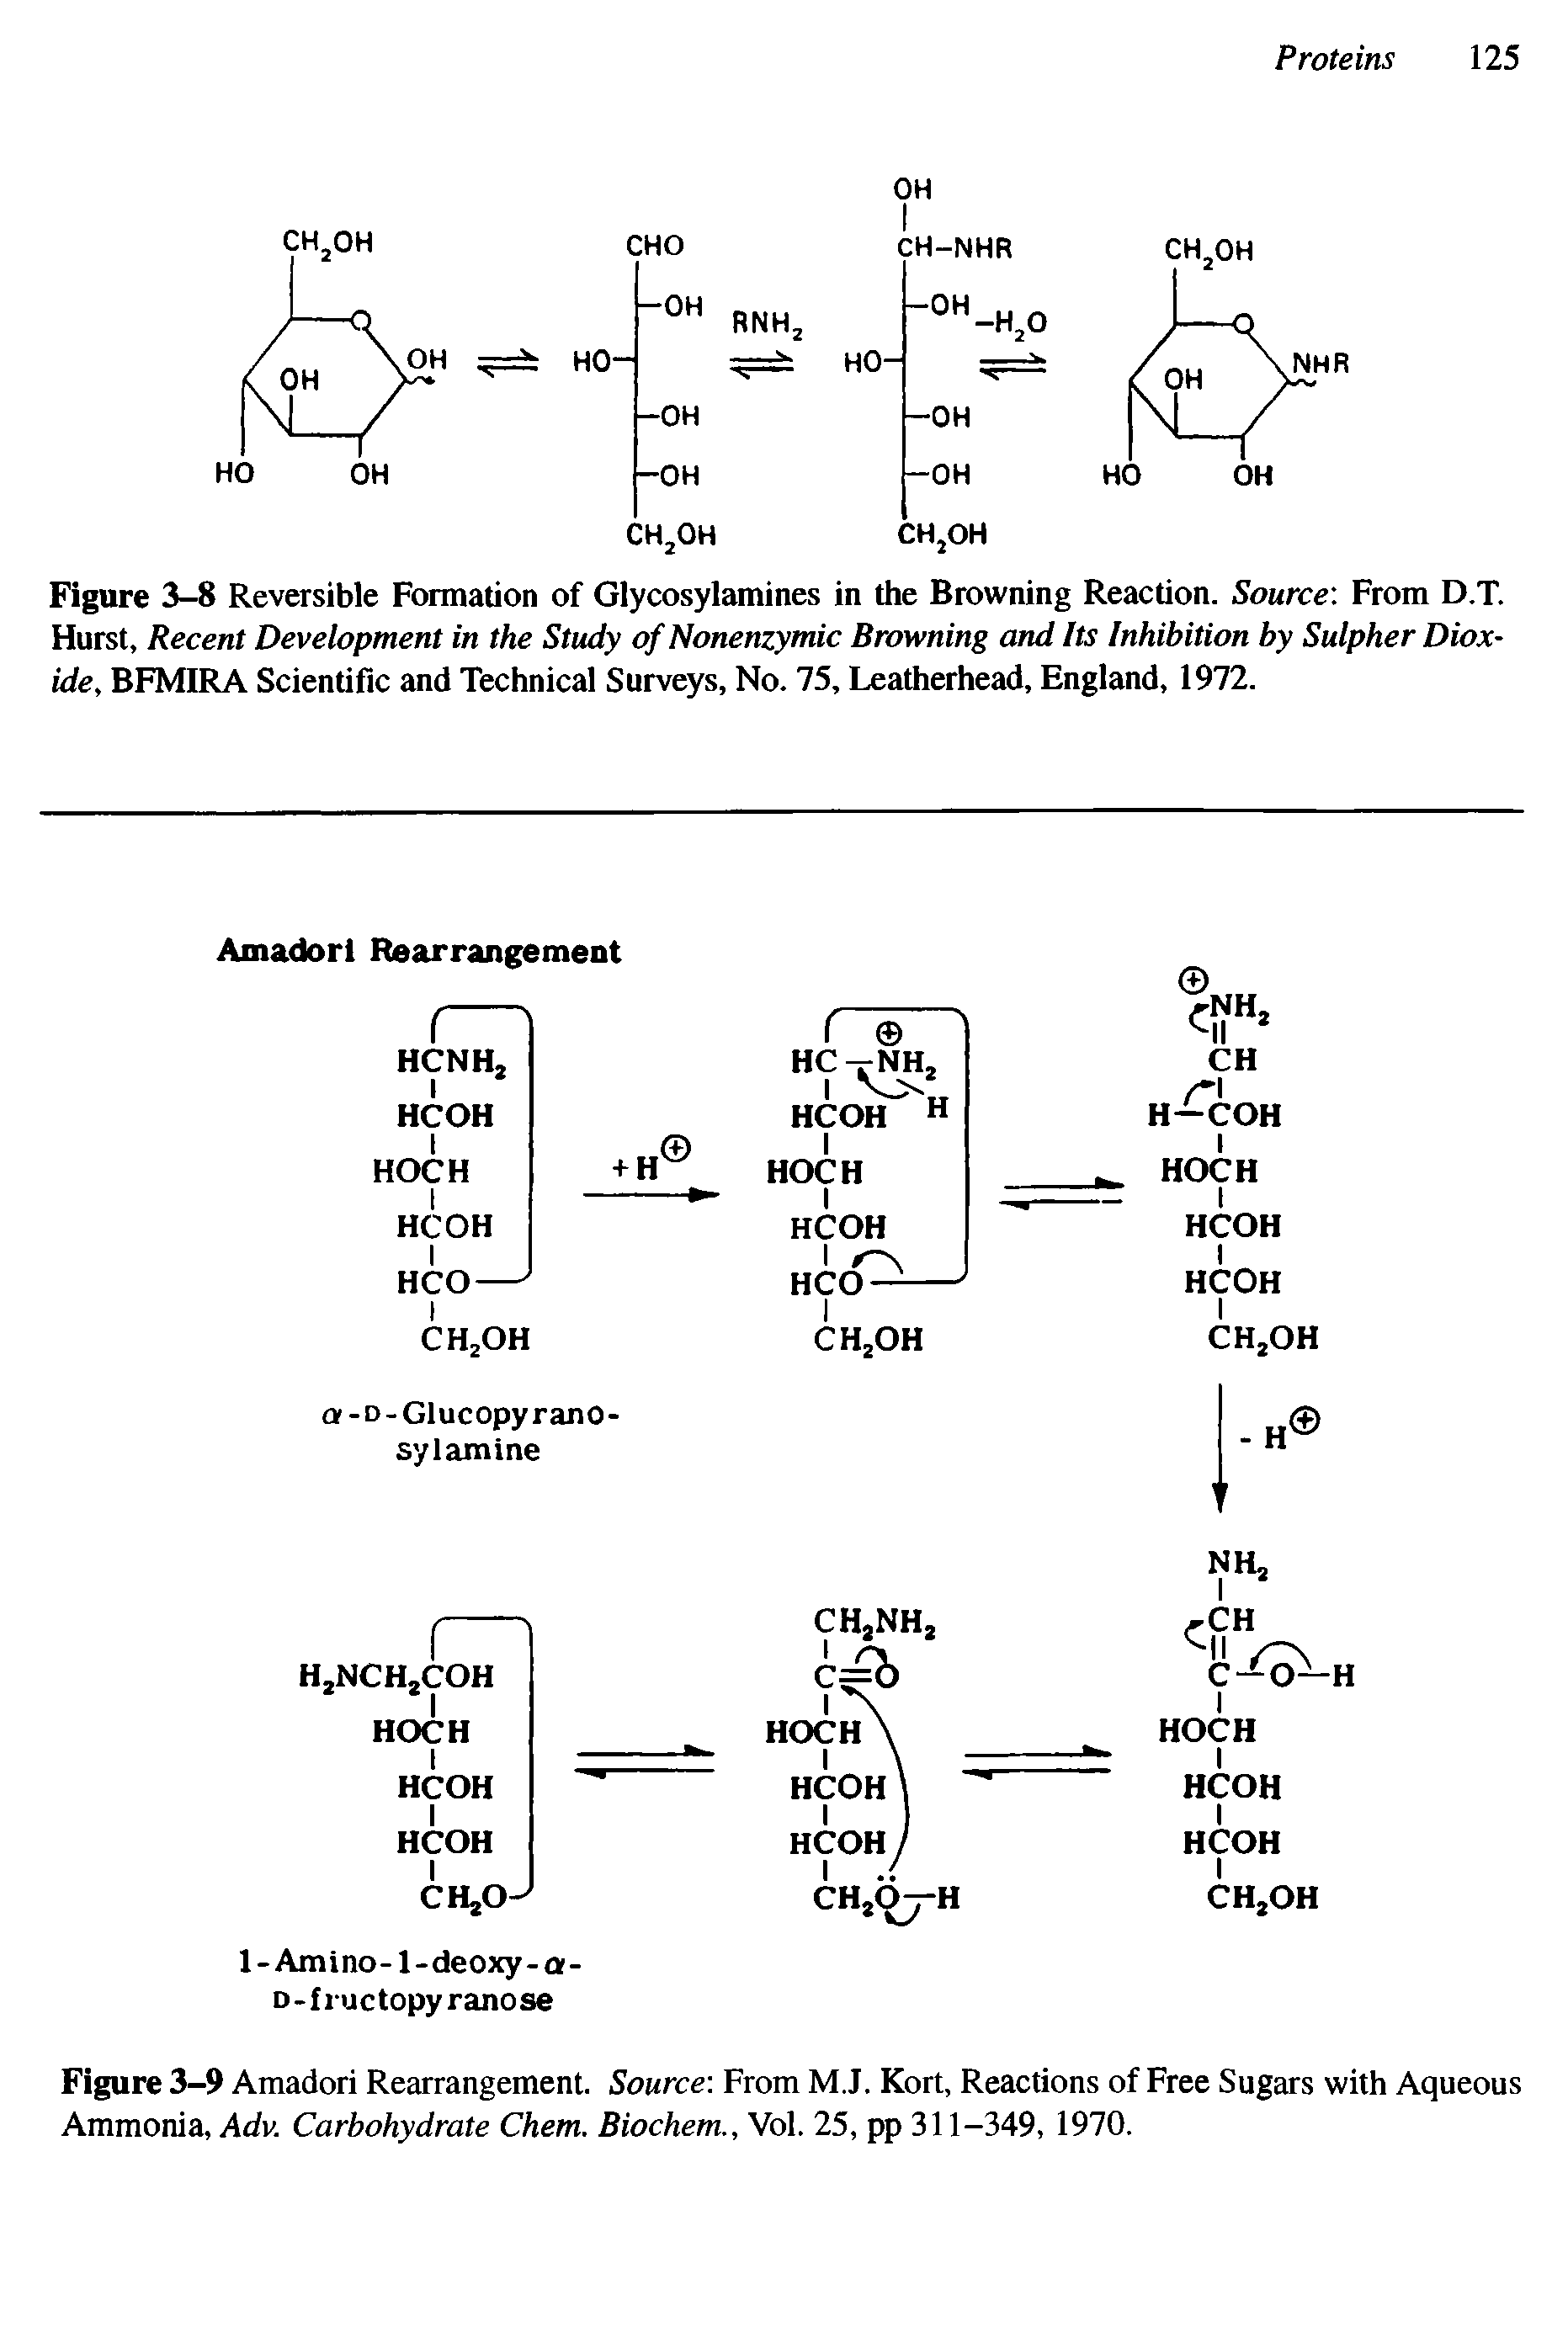 Figure 3-8 Reversible Formation of Glycosylamines in the Browning Reaction. Source From D.T. Hurst, Recent Development in the Study of Nonenzymic Browning and Its Inhibition by Sulpher Dioxide, BFMIRA Scientific and Technical Surveys, No. 75, Leatherhead, England, 1972.